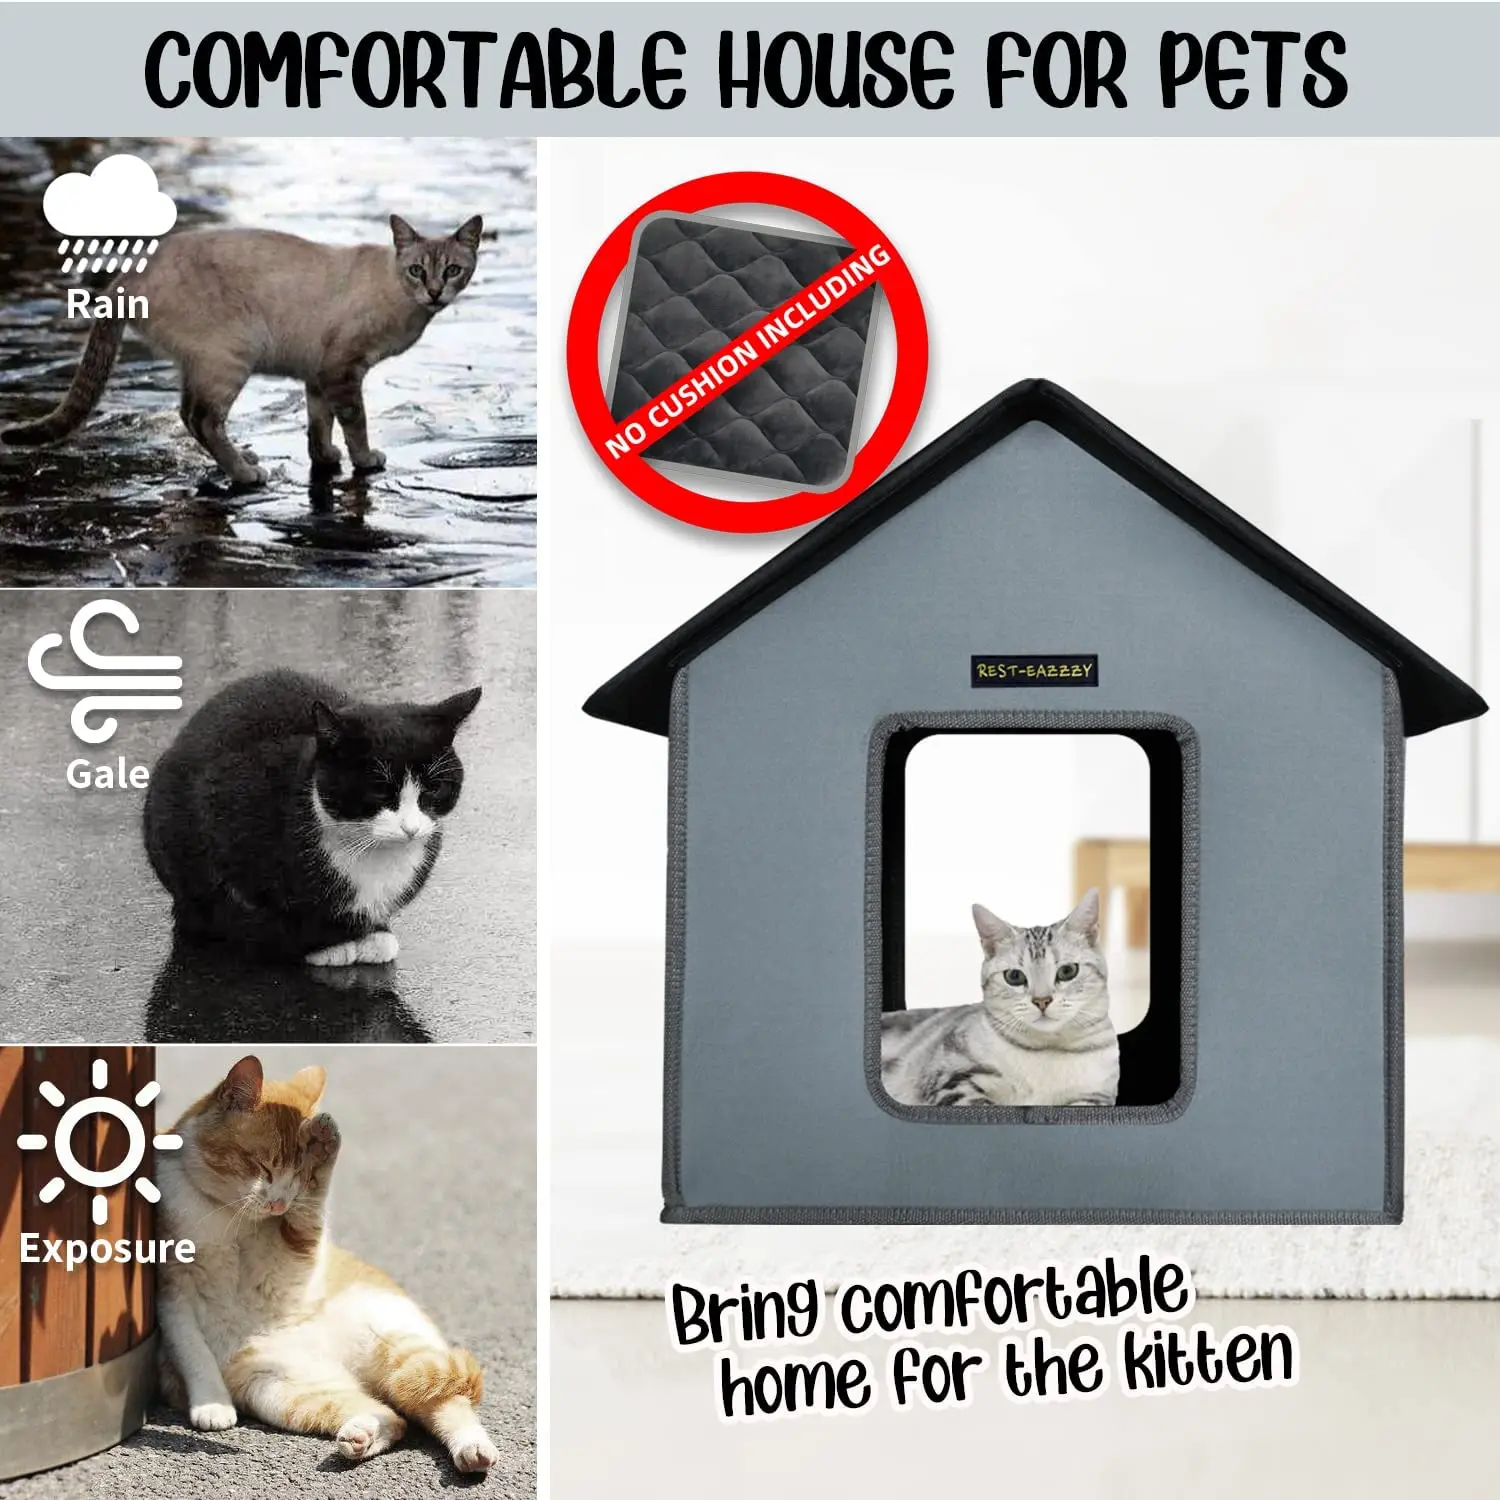 https://ae01.alicdn.com/kf/Sadf9563013d04ee2a1365a3854cdcbe9T/Foldable-Dog-Cat-House-Outdoor-Pet-Cat-Bed-Dog-Villa-Sleep-Kennel-Removable-Nest-Cave-Sofa.jpg